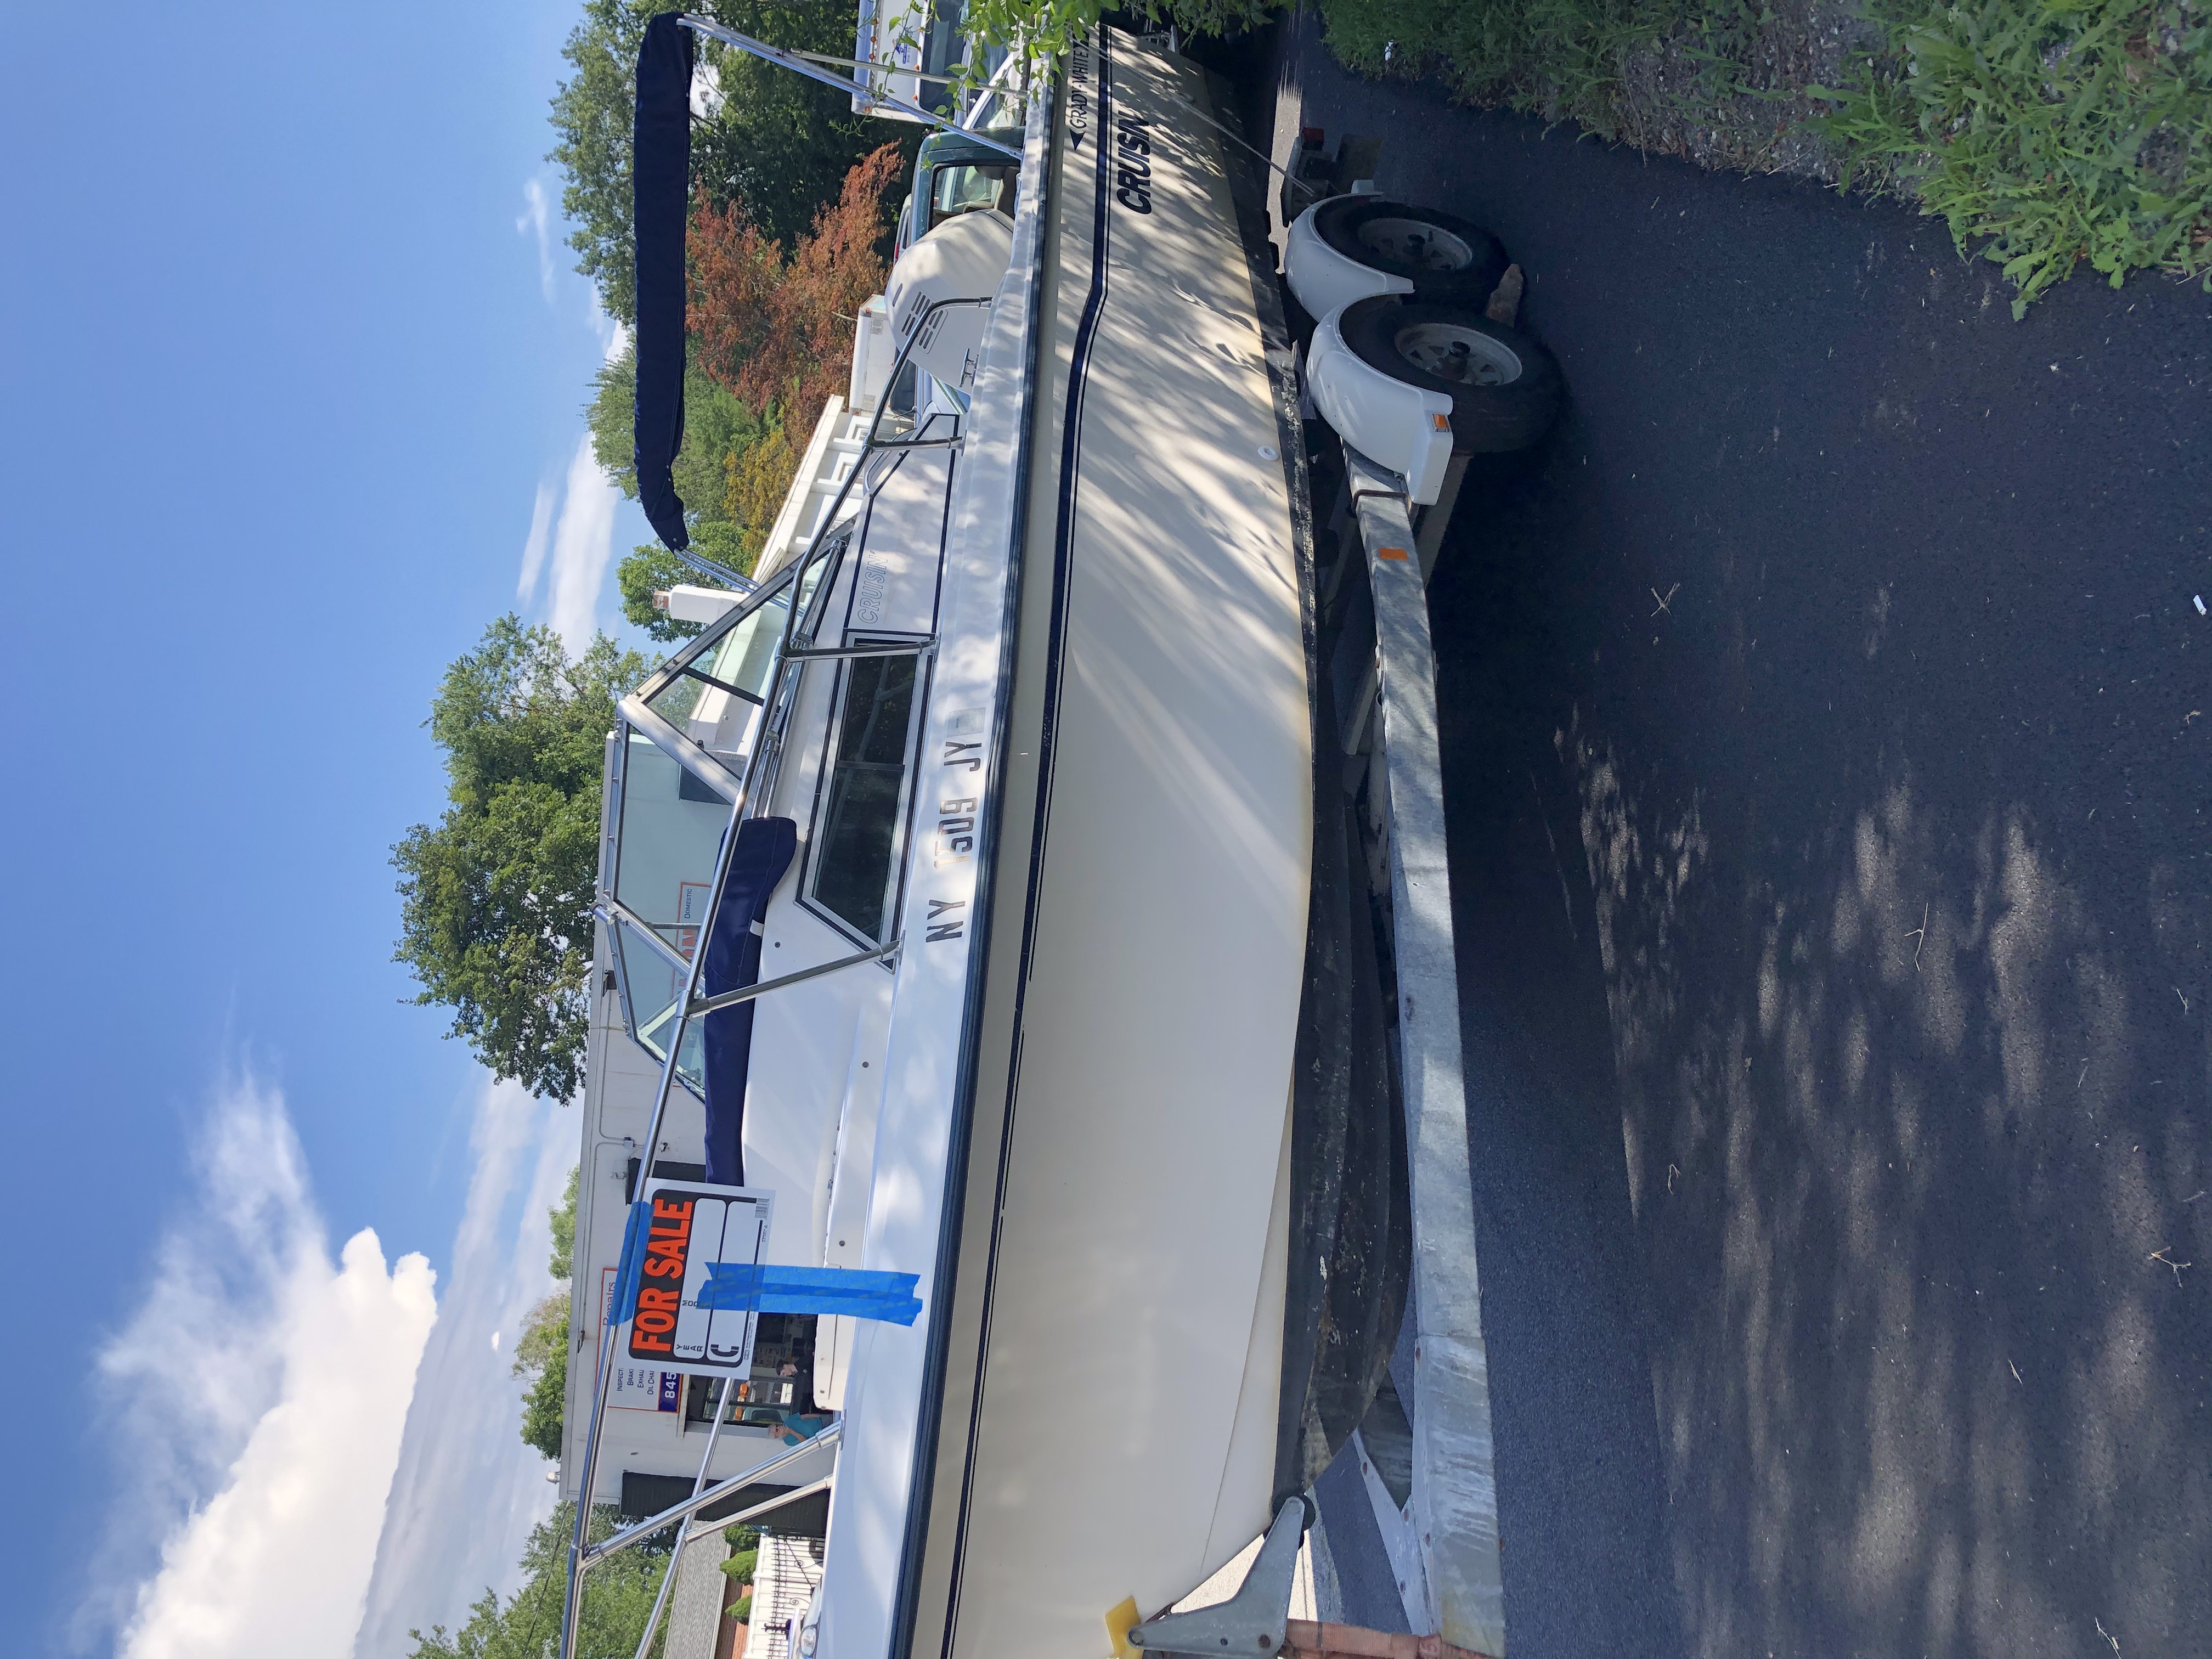 1989 Grady-White 20' Overnighter Power boat for sale in Kent Lakes, NY - image 2 